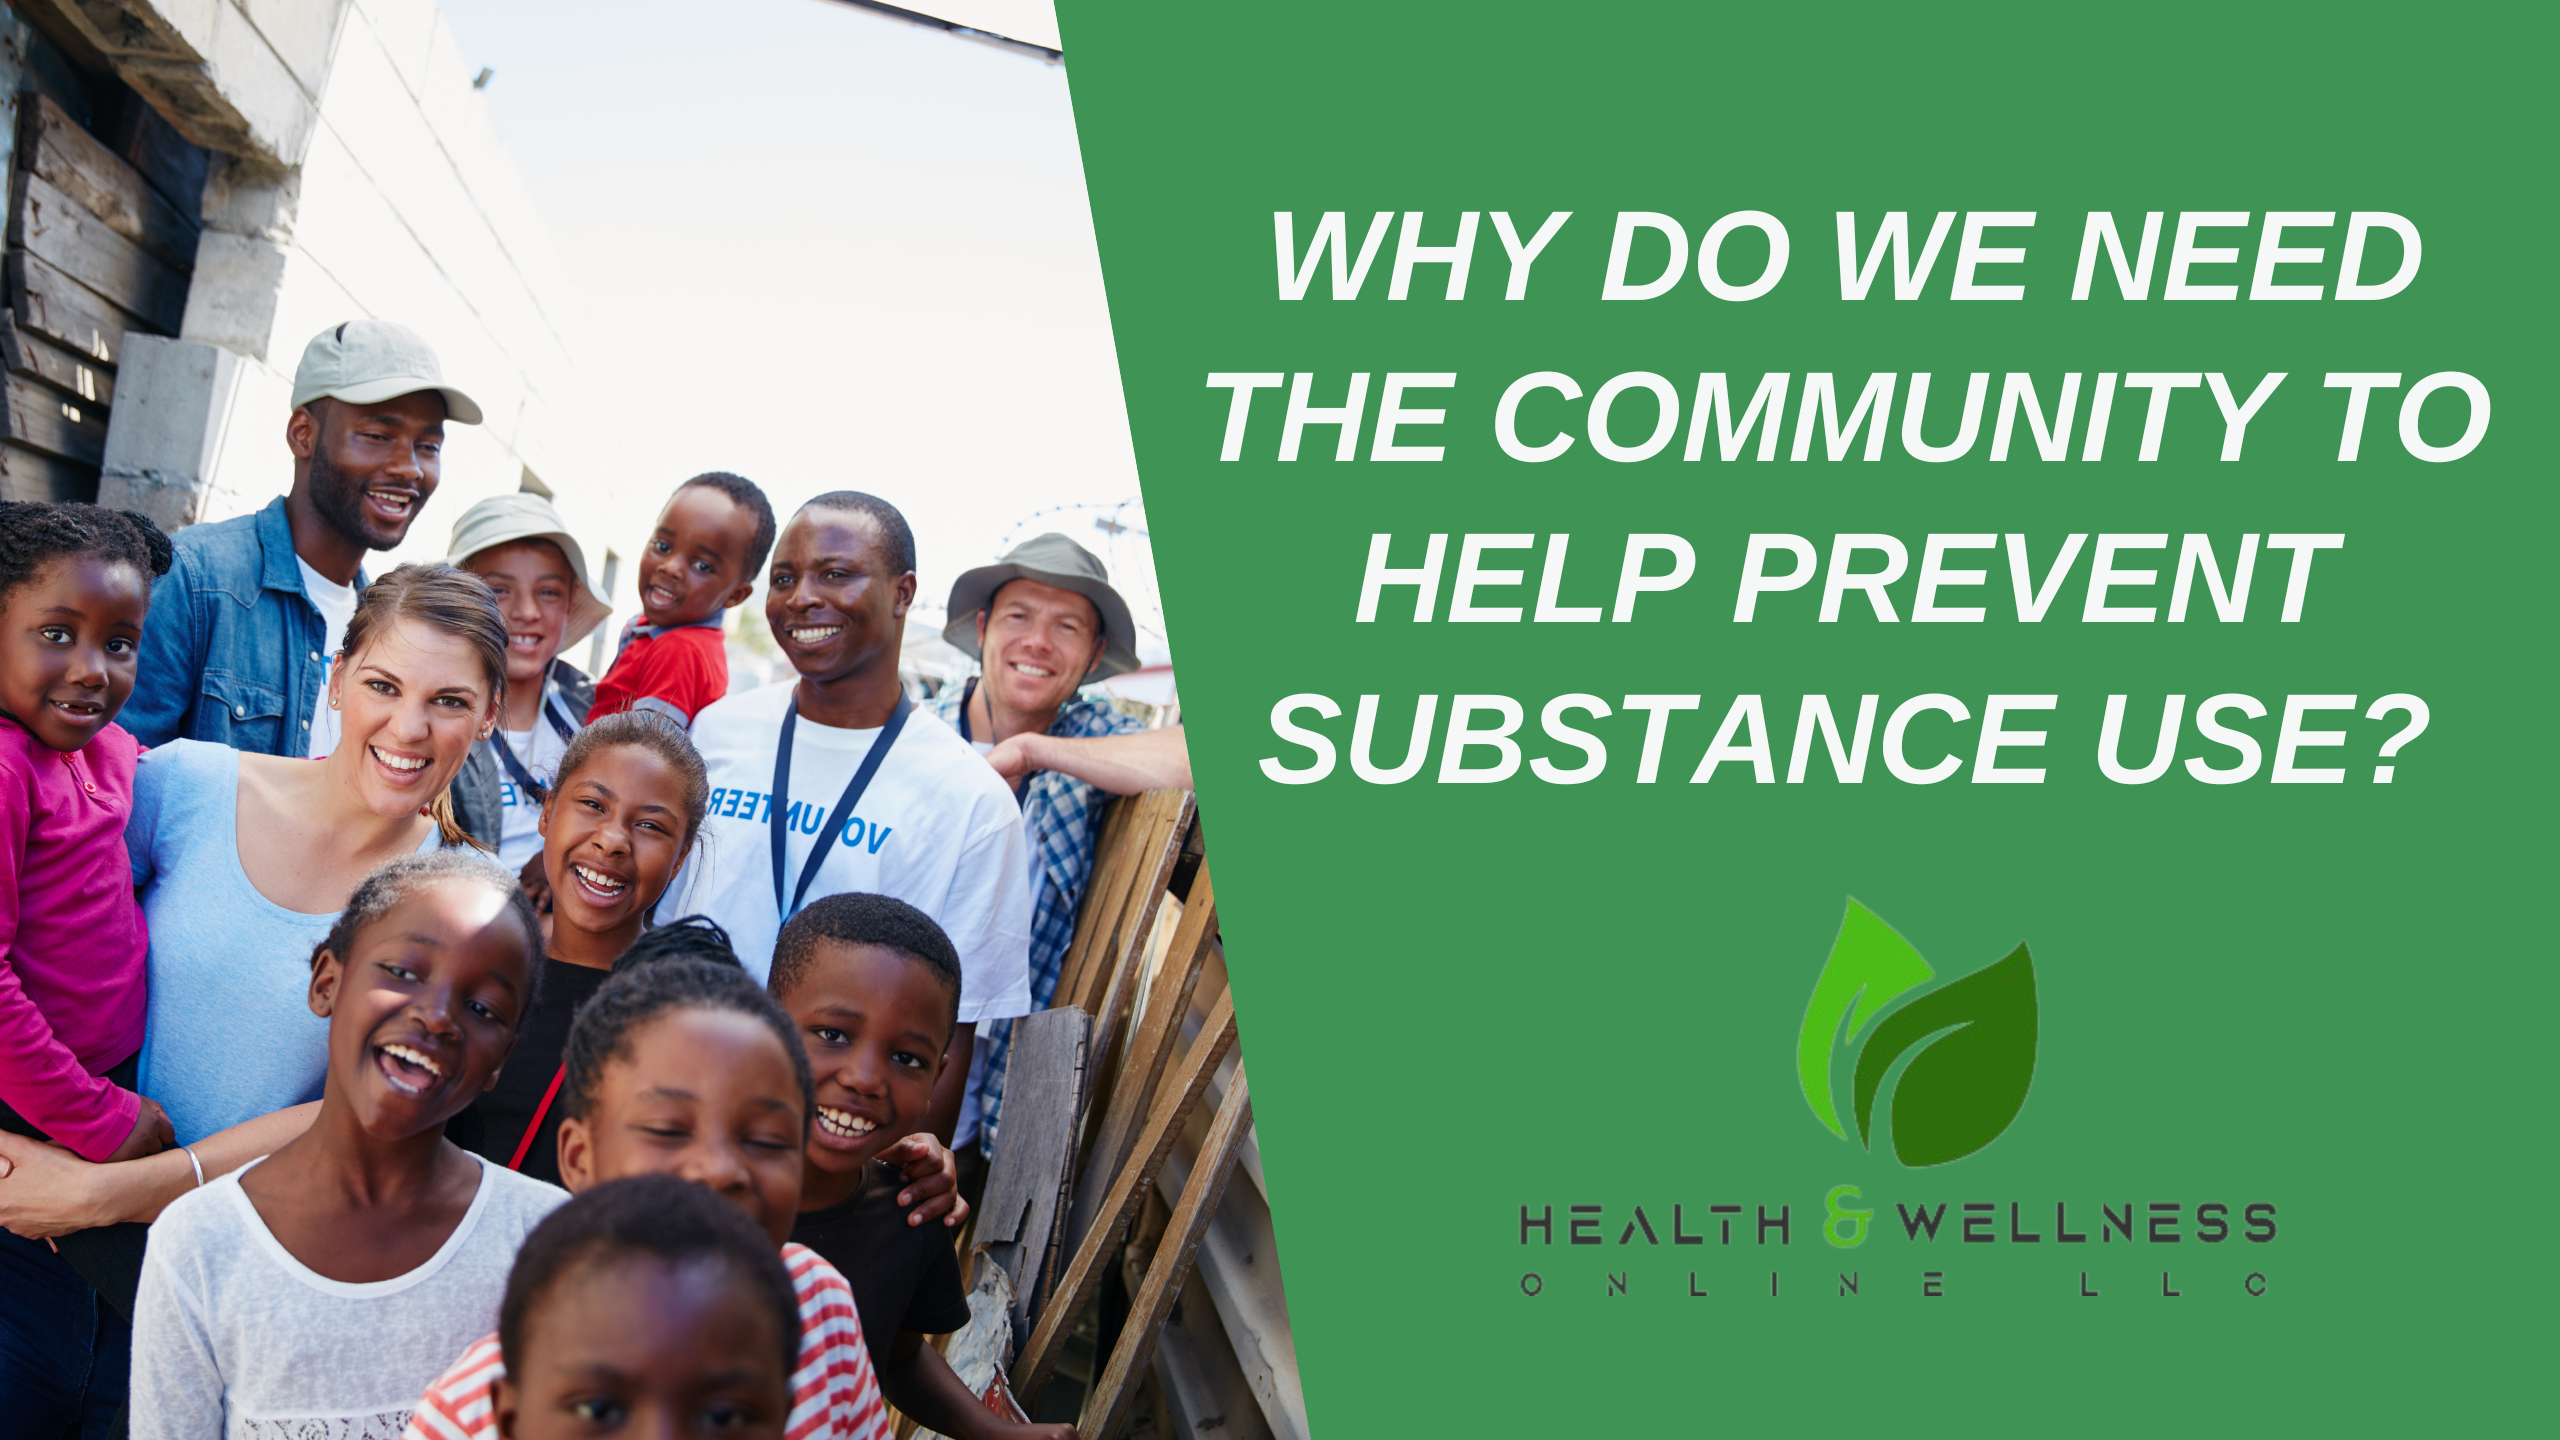 Why Do We Need the Community to Help Prevent Substance Use? is a 3 CE Credit Hours course by Dr. Donna Poppendieck from Health and Wellness Online.